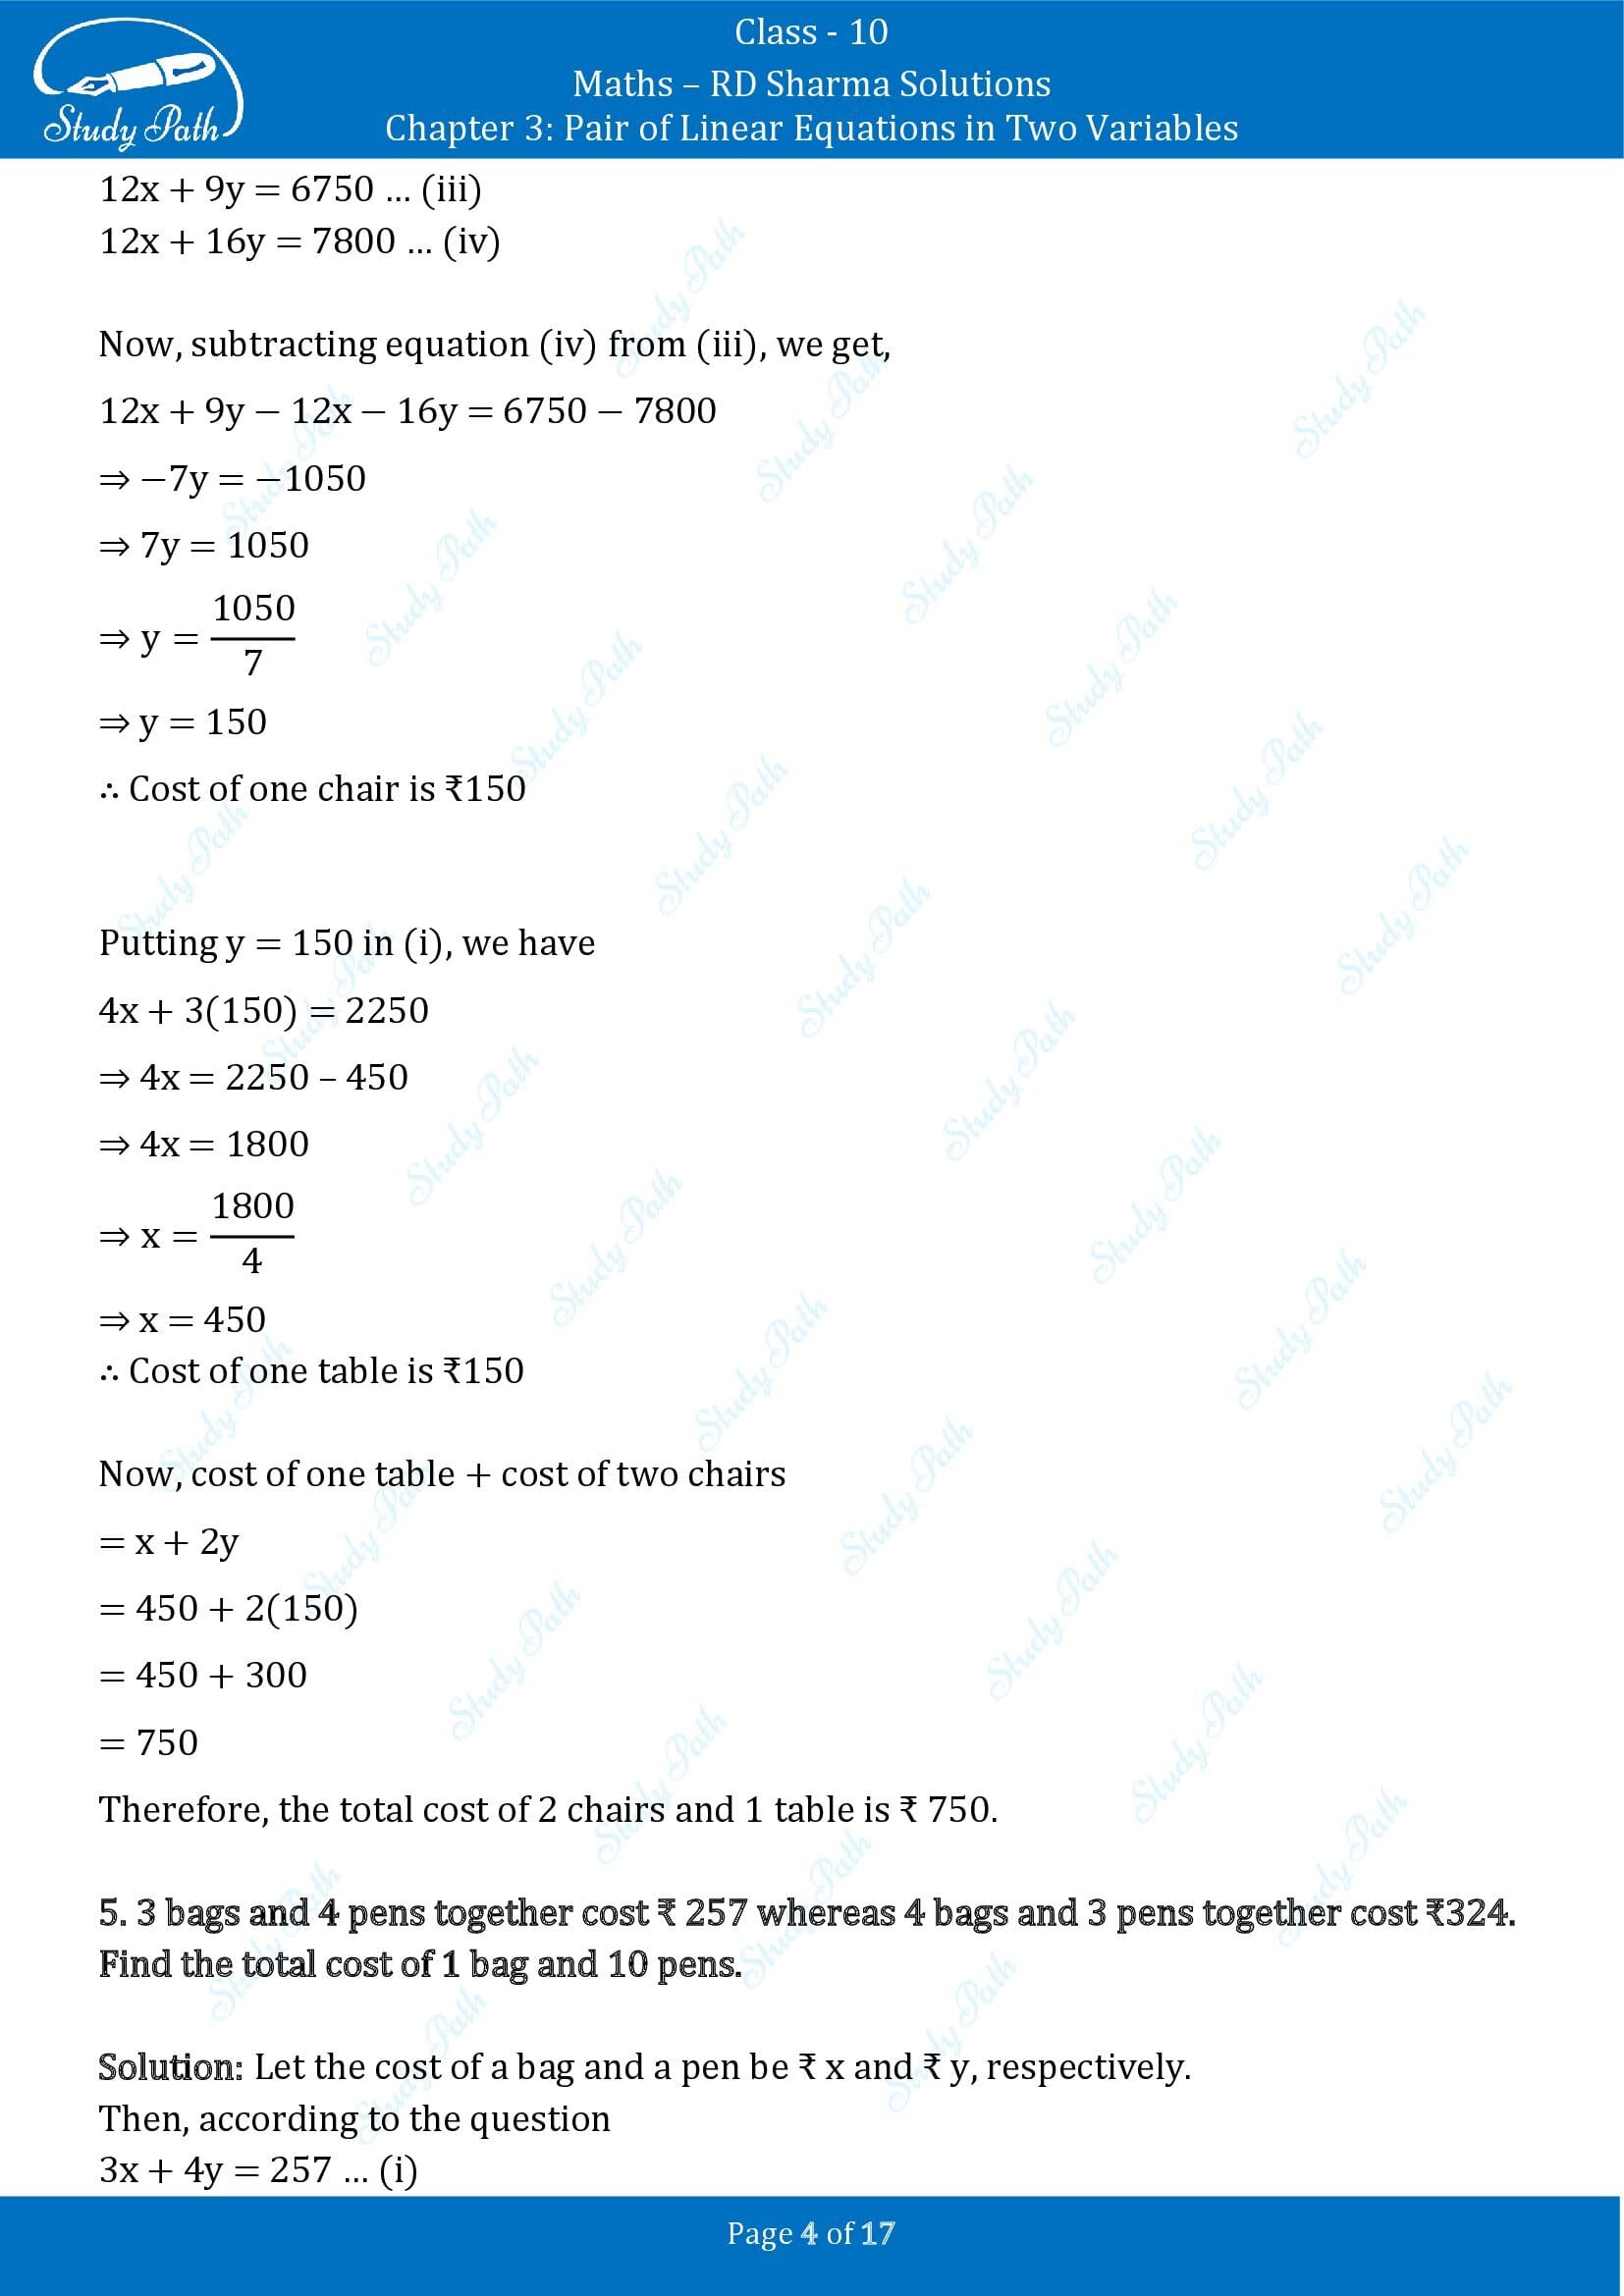 RD Sharma Solutions Class 10 Chapter 3 Pair of Linear Equations in Two Variables Exercise 3.6 00004